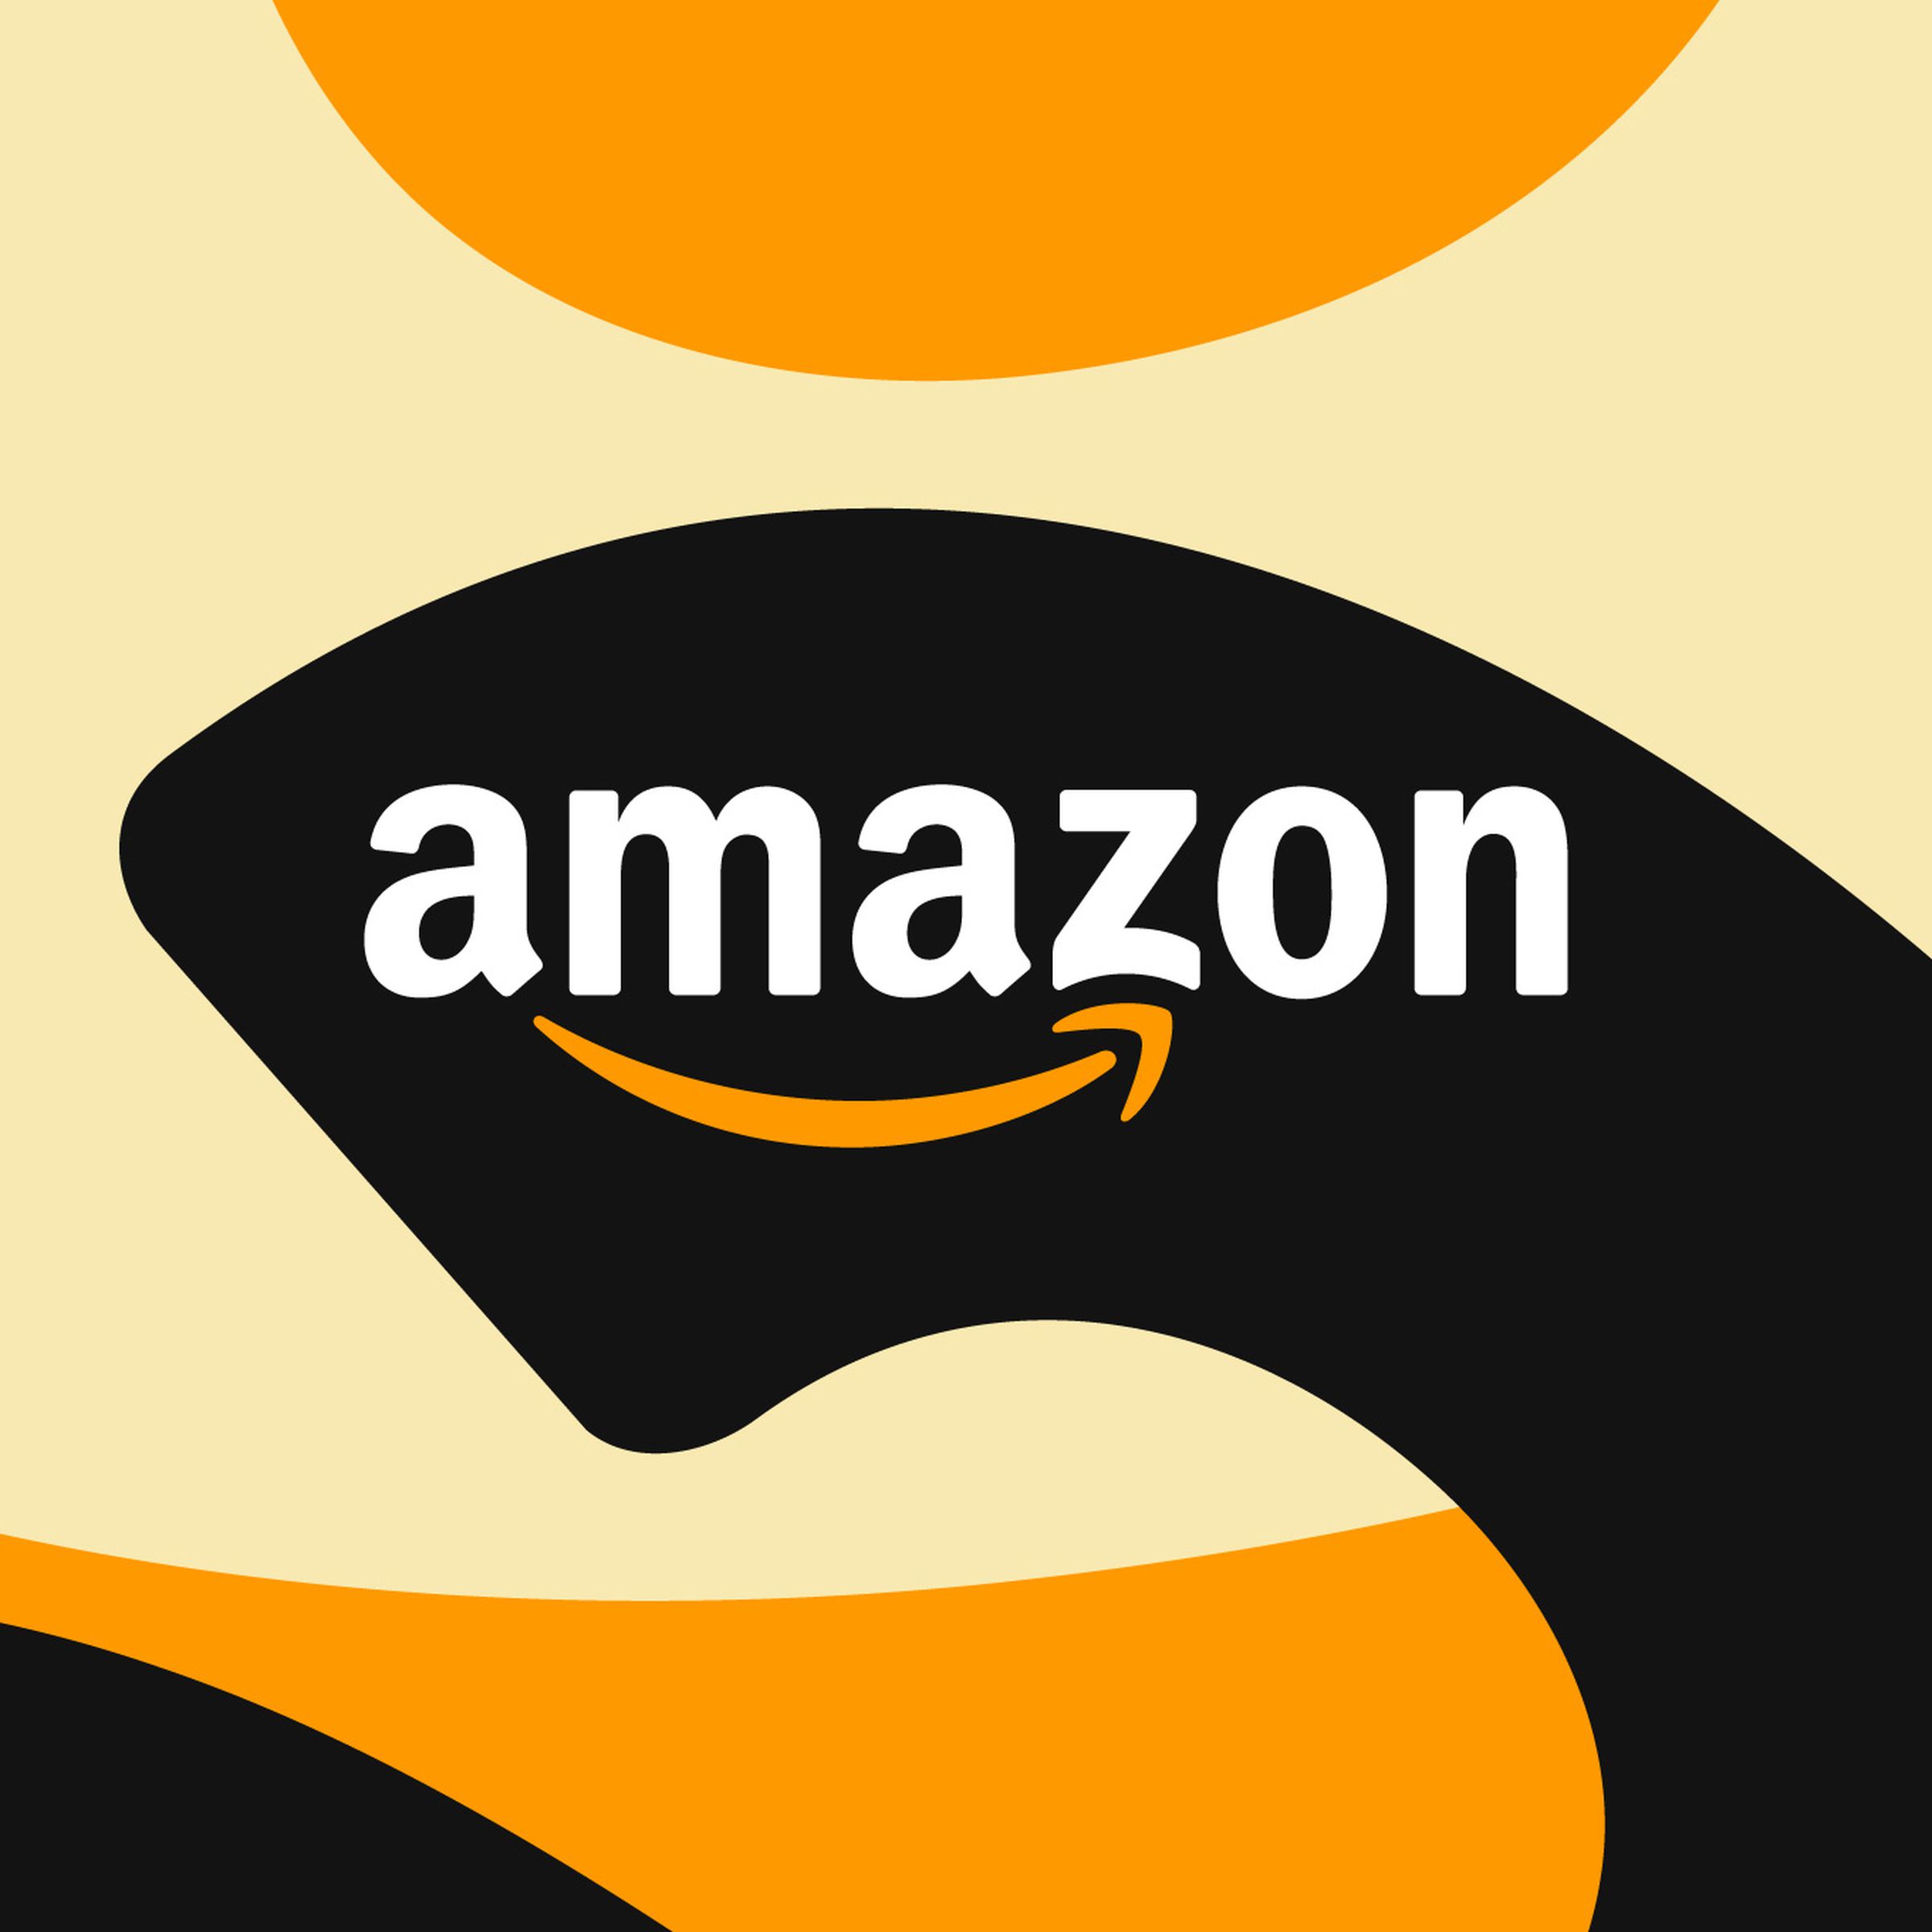 Illustration showing Amazon’s logo on a black, orange, and tan background, formed by outlines of the letter “a.”